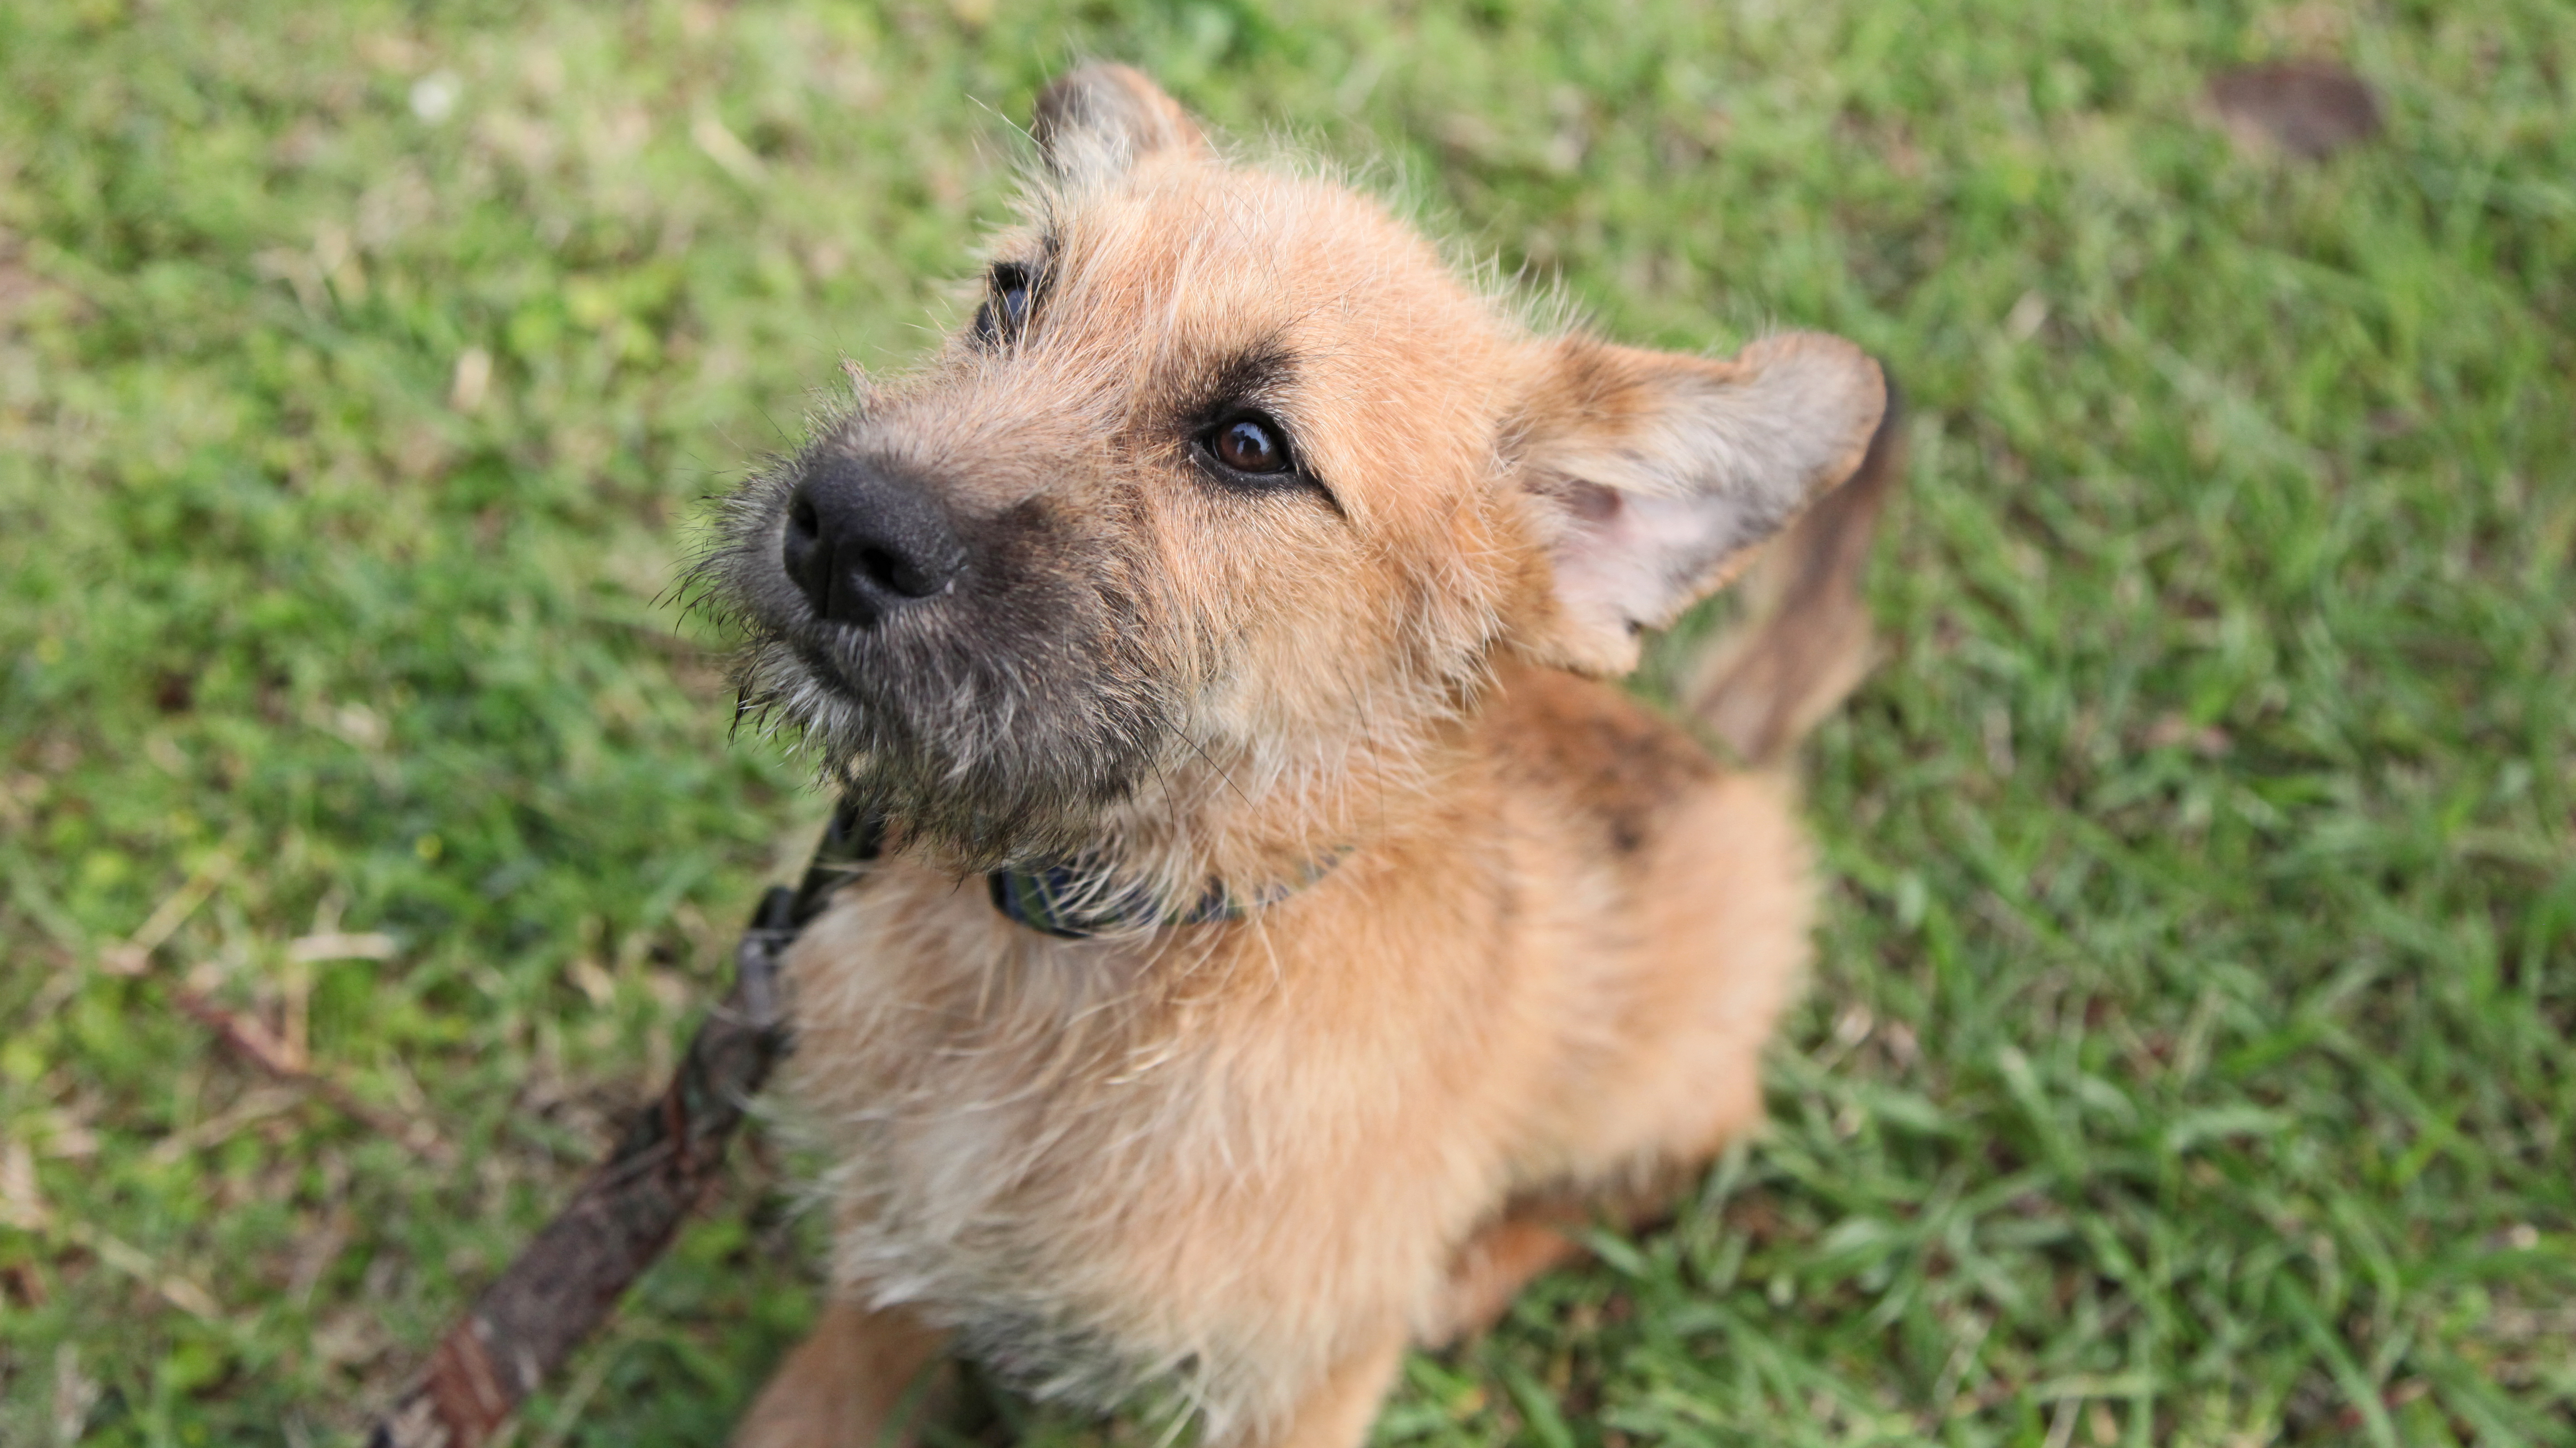 My name is I'm a Wirehaired Fox Terrier – believed to be 3 4 months old – who is looking for a family! If you would like to adopt